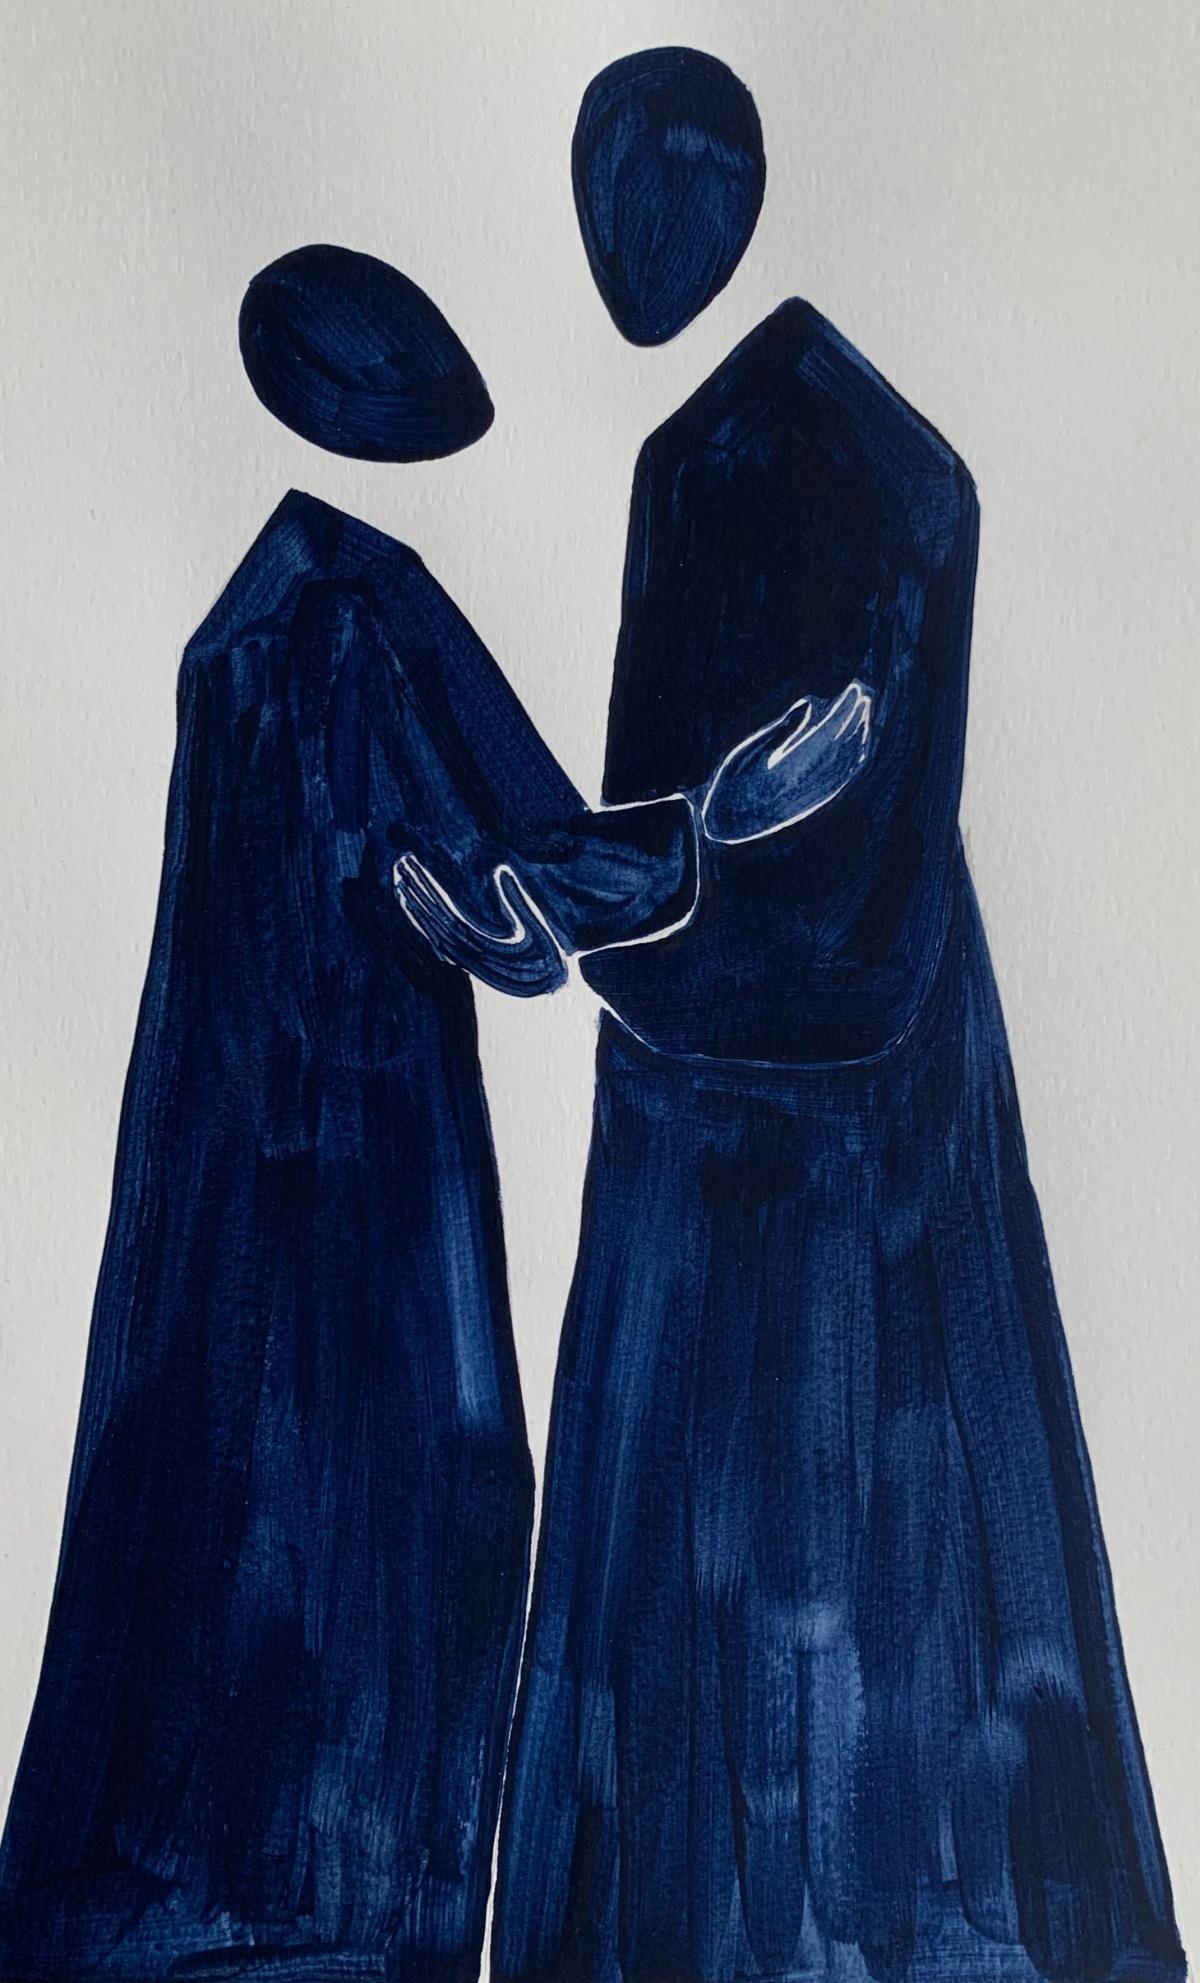 Figurative acrylic on paper painting by young professional European artist Waleria Matelska. Artwork is minimalist and composed with synthetic shapes. Painting is vibrant- main colors are navy blue. There are two figures exchanging embrace,

WALERIA